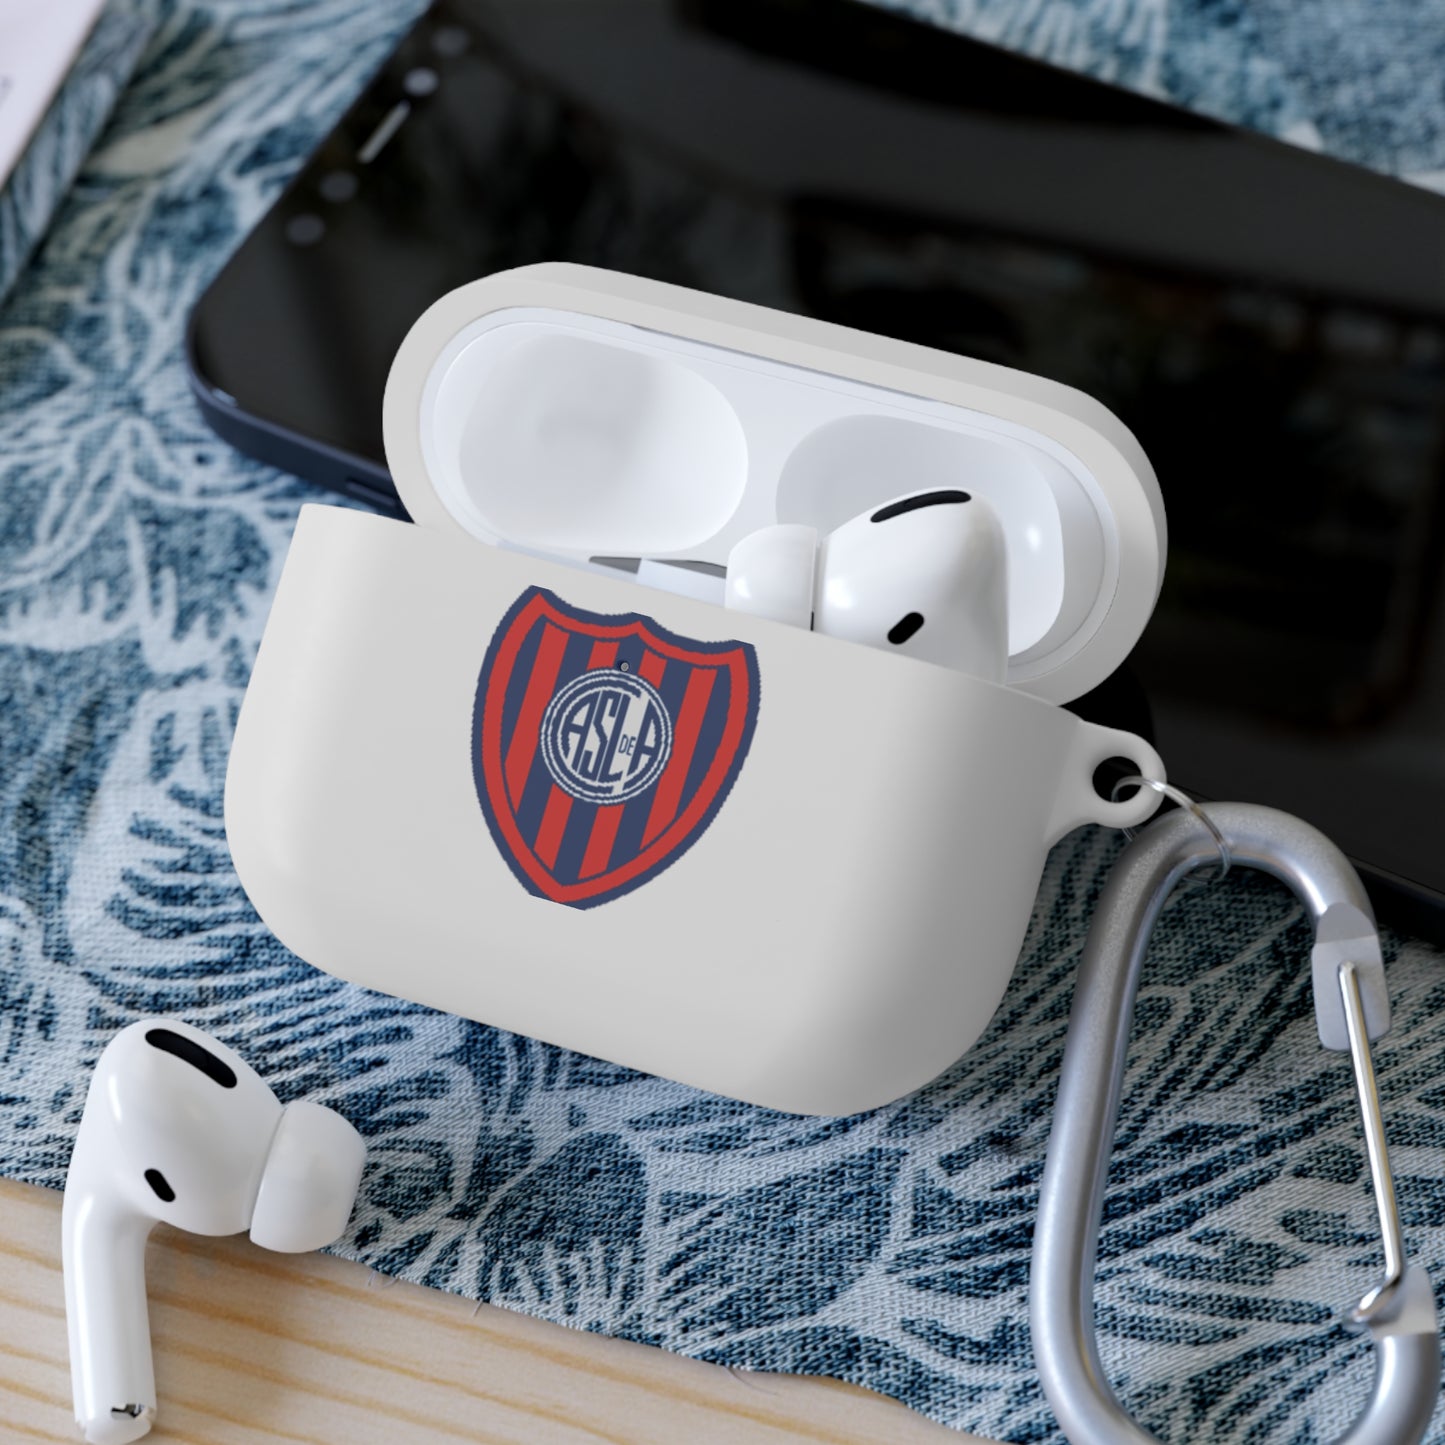 Club Atlético San Lorenzo de Almagro AirPods and AirPods Pro Case Cover